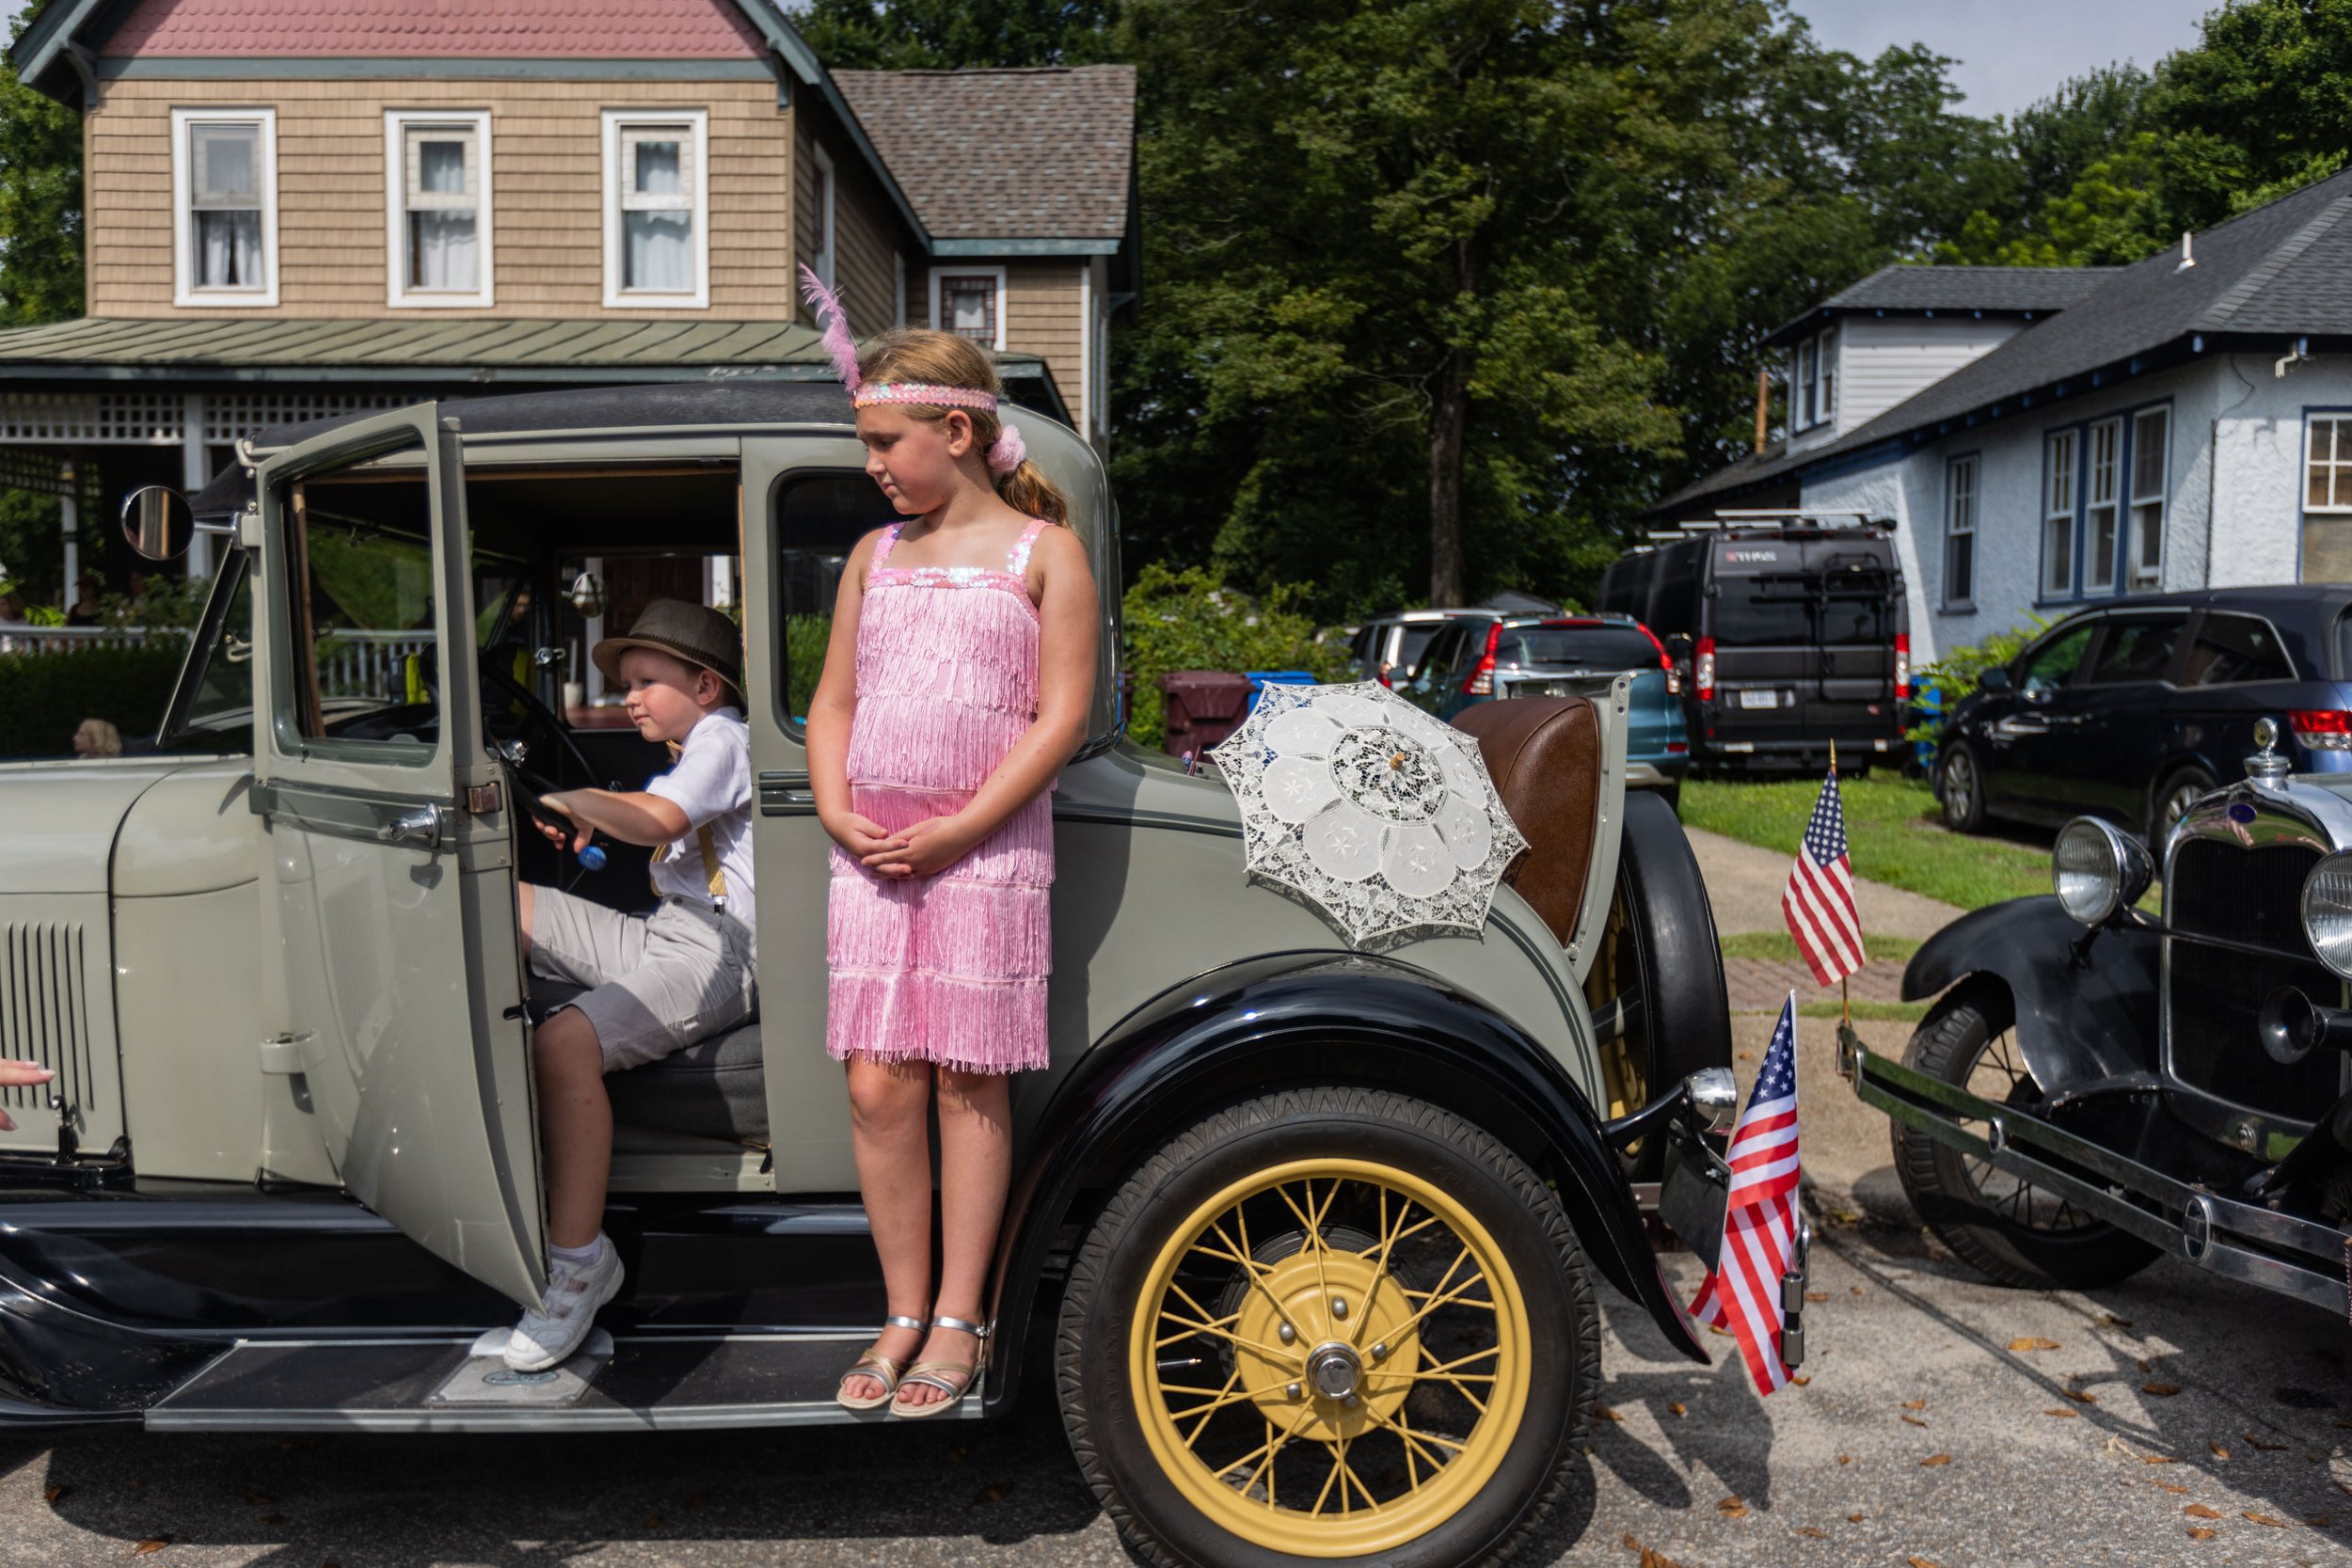  Aiden McCoy, 6, left, and sister Alaina McCoy, 9, prepare to ride in their parents’ Model A as members of the Cape Henry Model A Ford Club in the South Norfolk July 4th Parade hosted by The South Norfolk Civic League and the Chesapeake Parks, Recrea